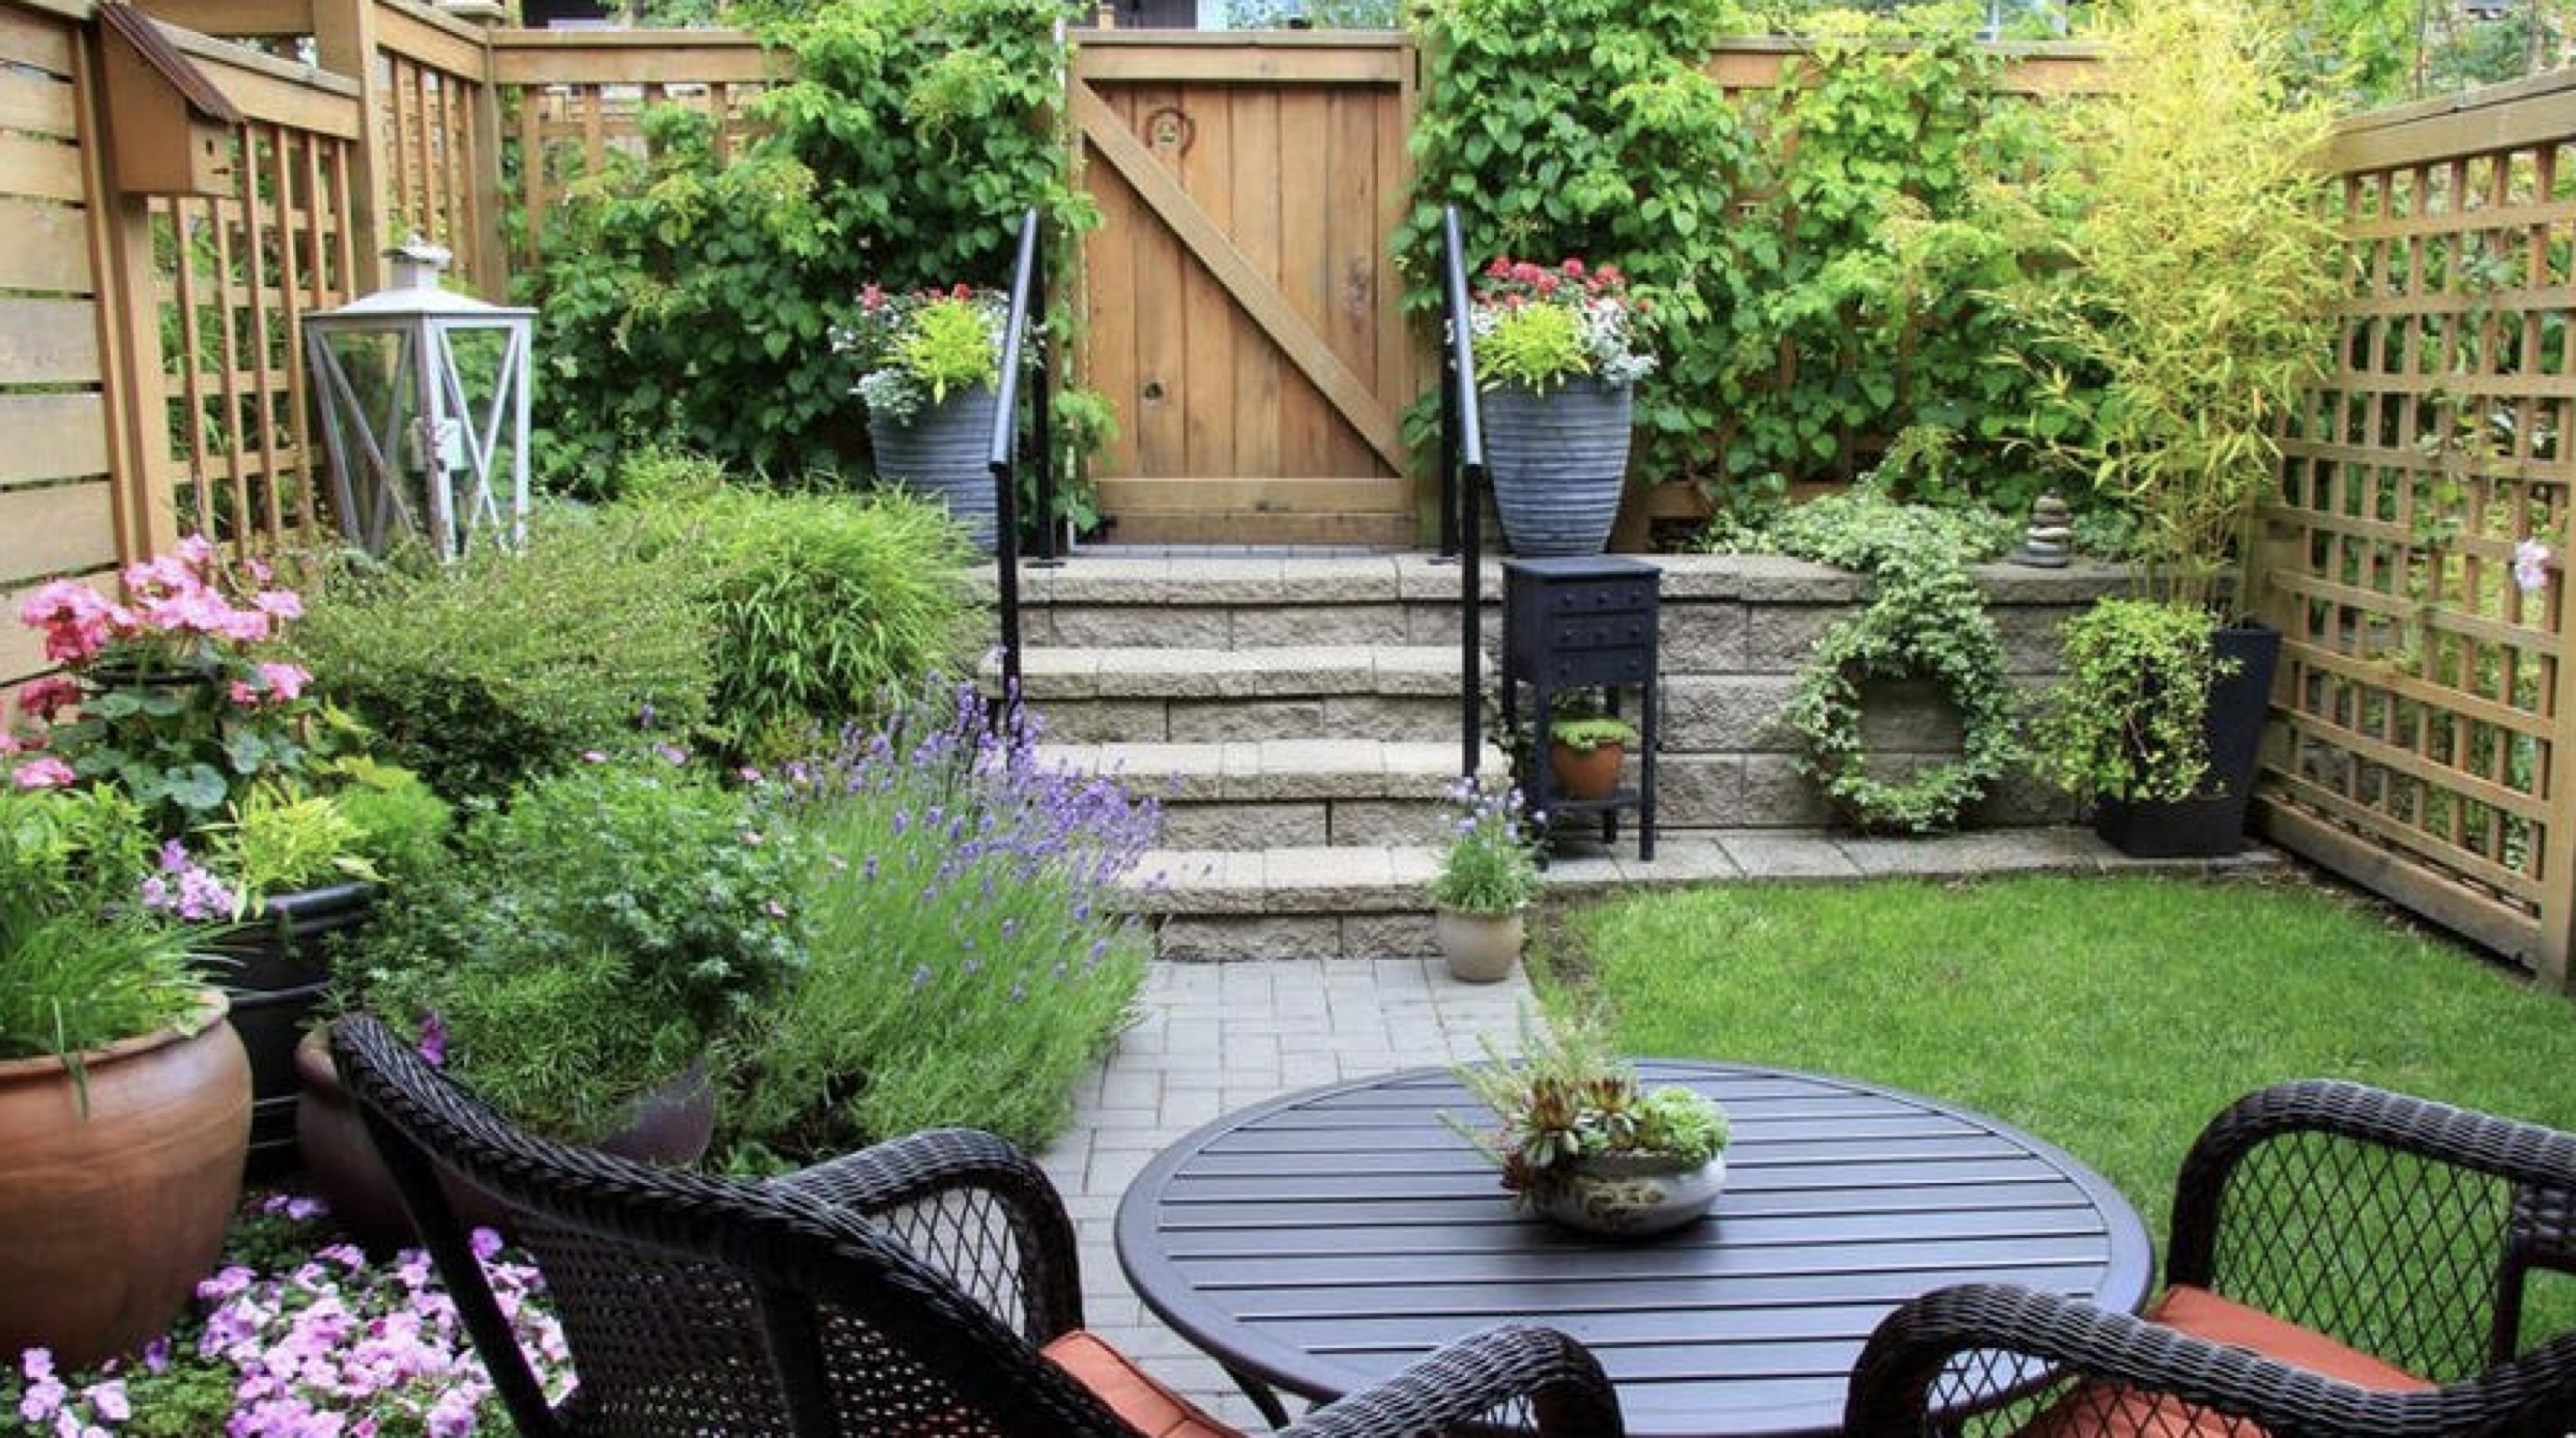 18 Stunning Budget Small Garden Ideas For Your Home